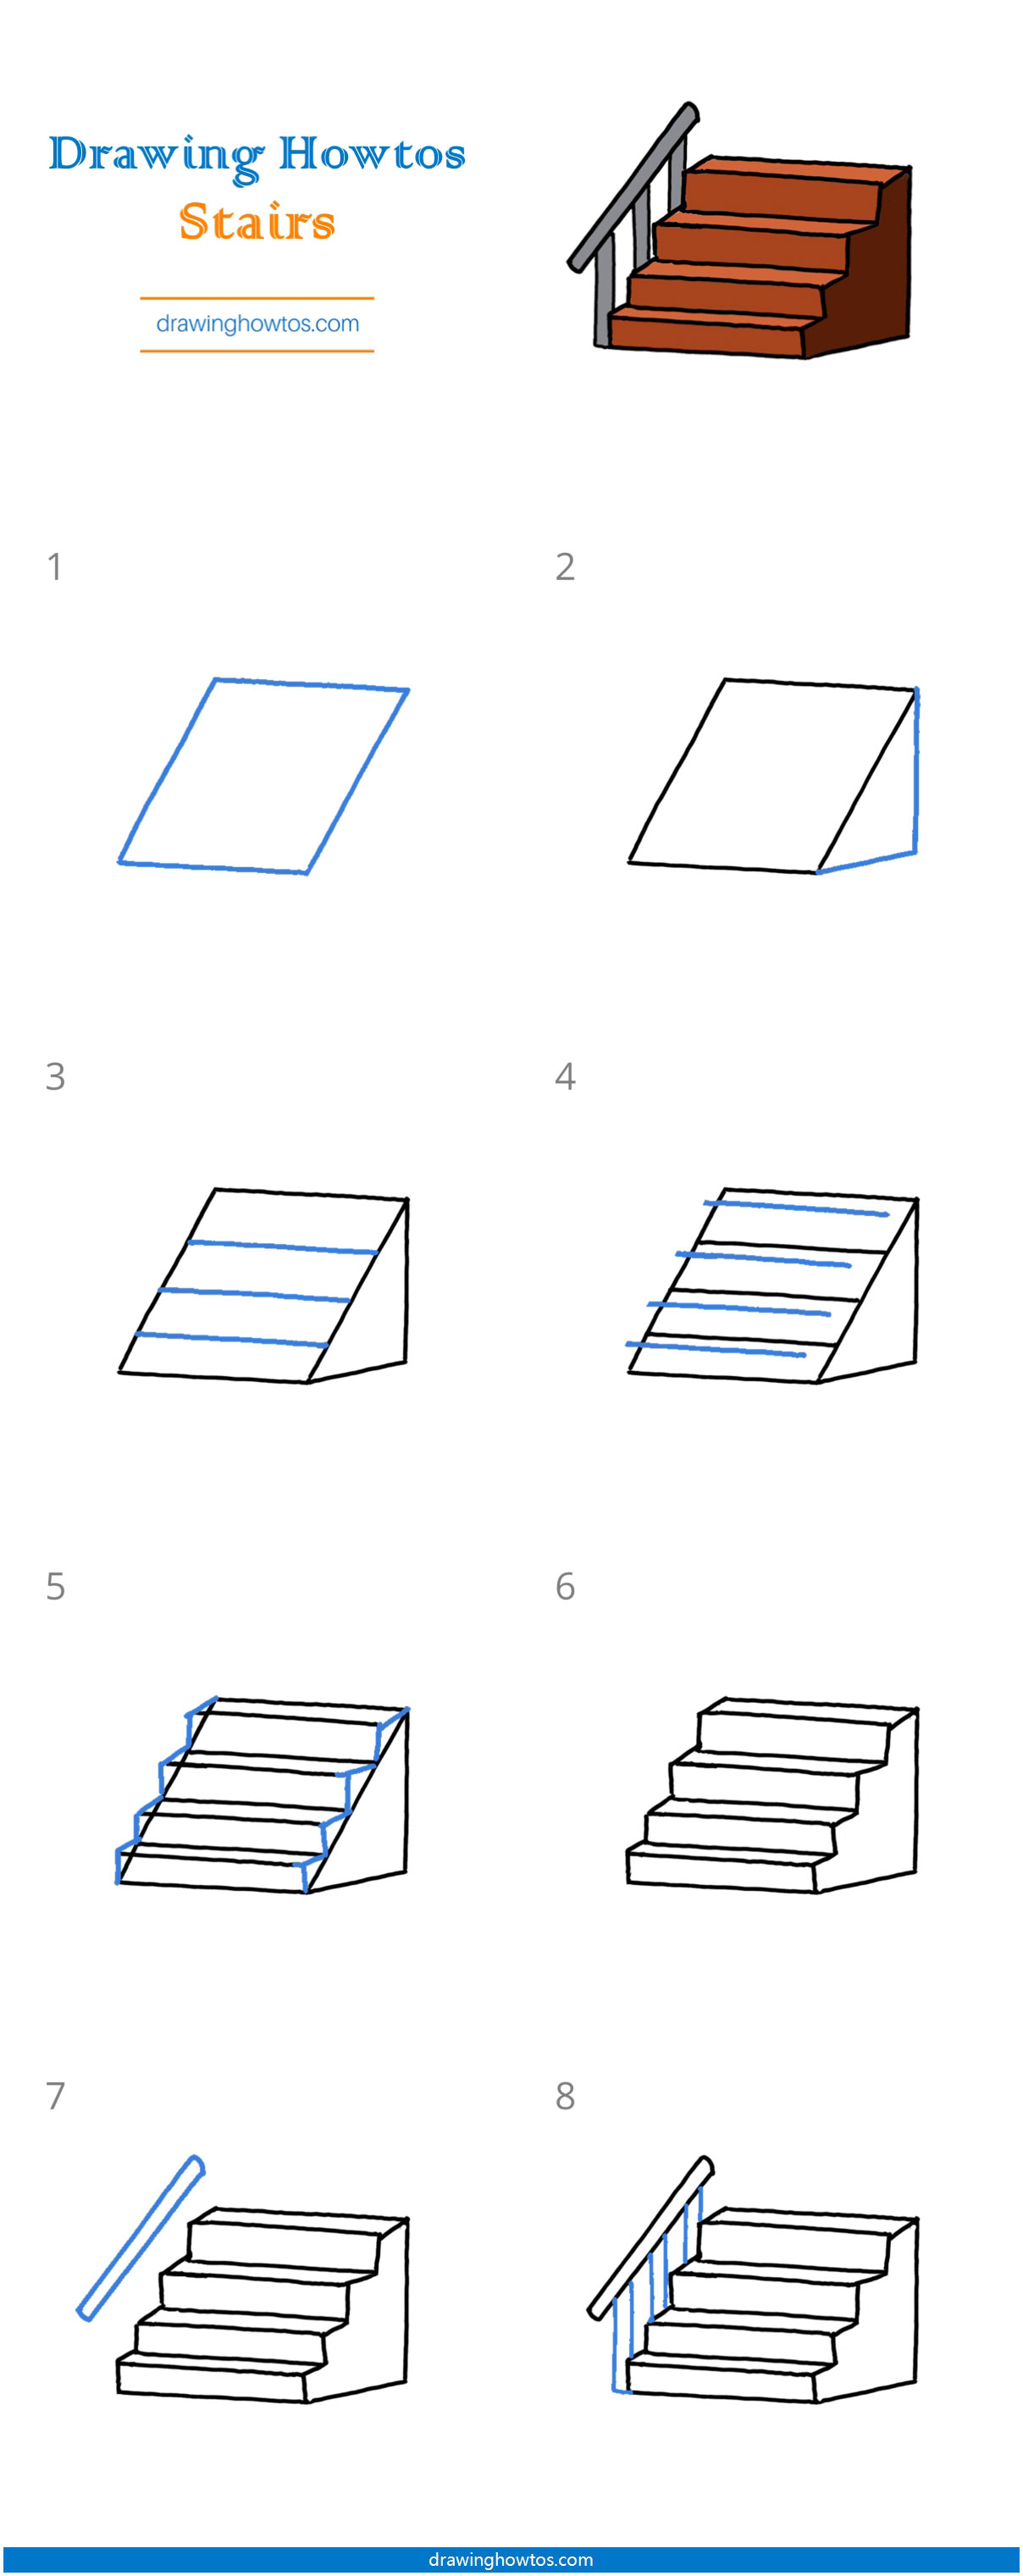 Stairs Drawing - How To Draw Stairs Step By Step